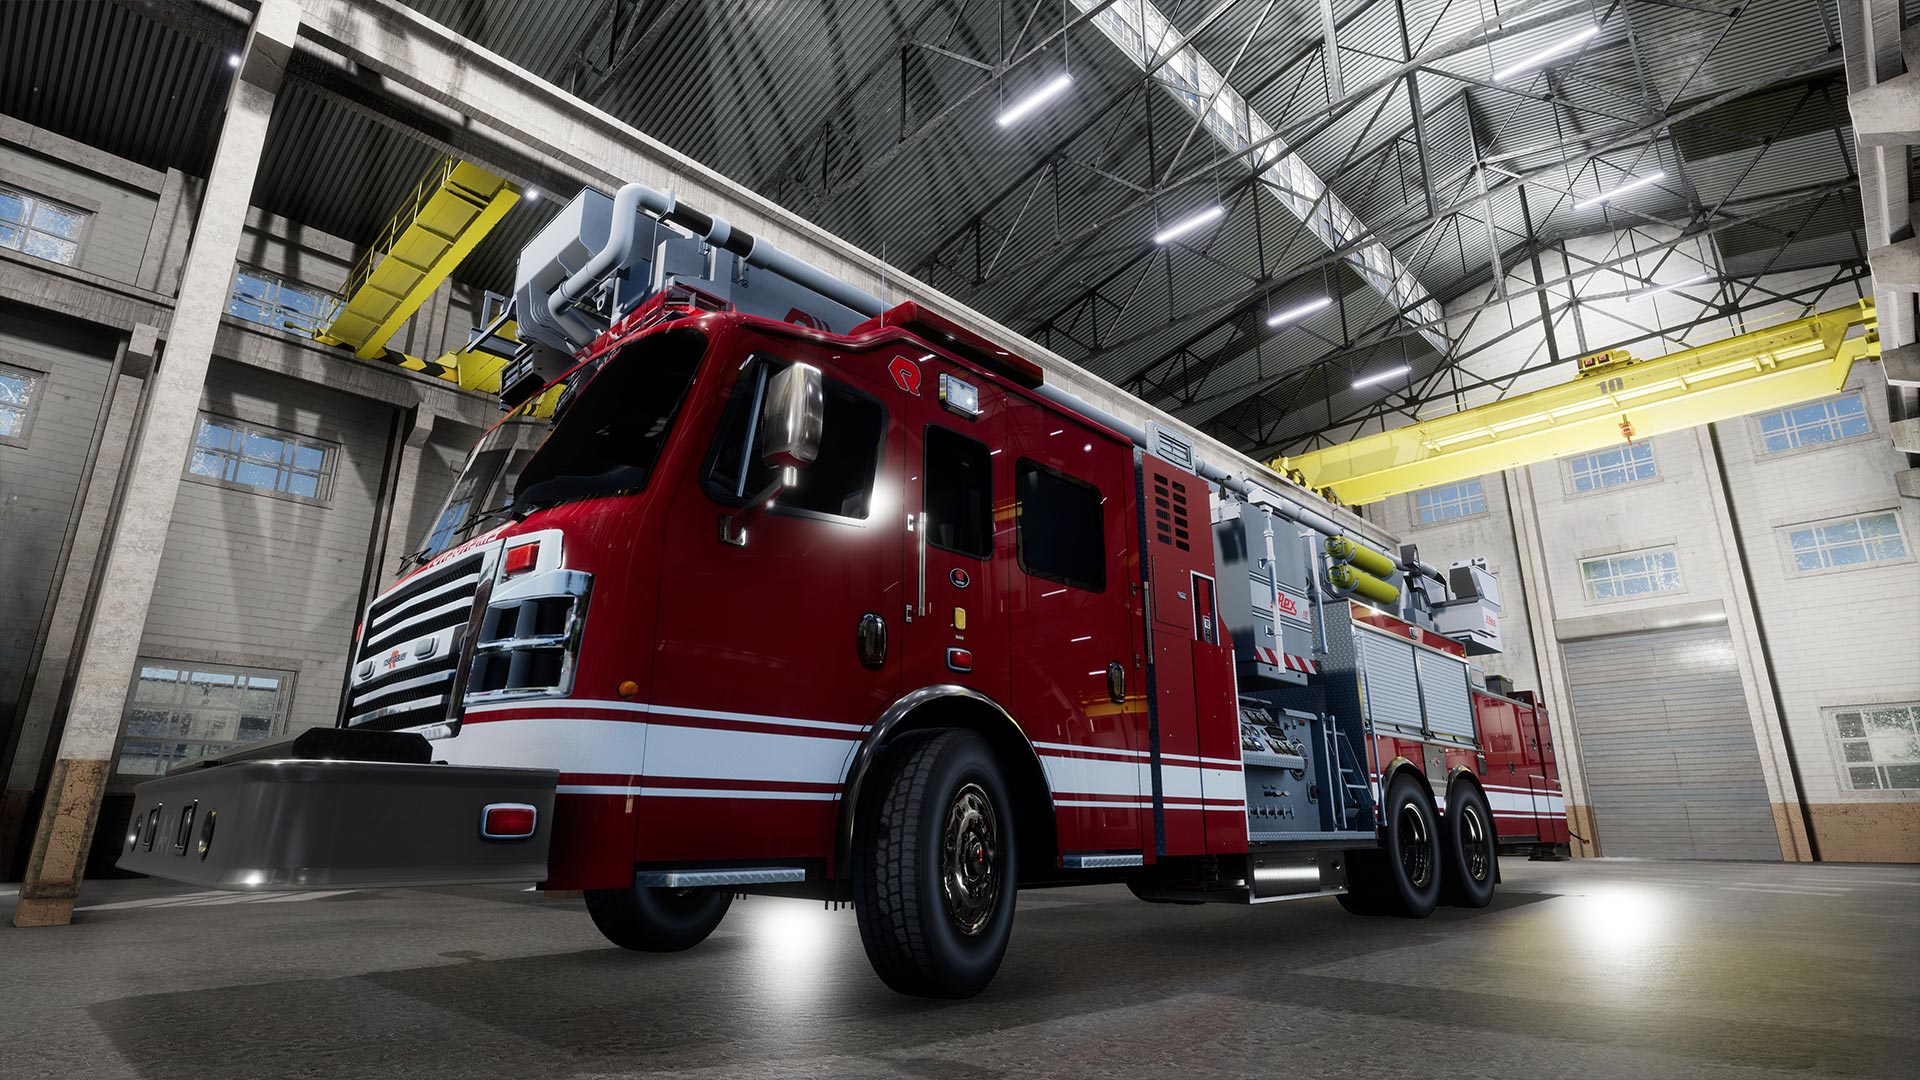 Firefighting Simulator Coming 2020 On Pc - forest fire roblox fire fighting sim